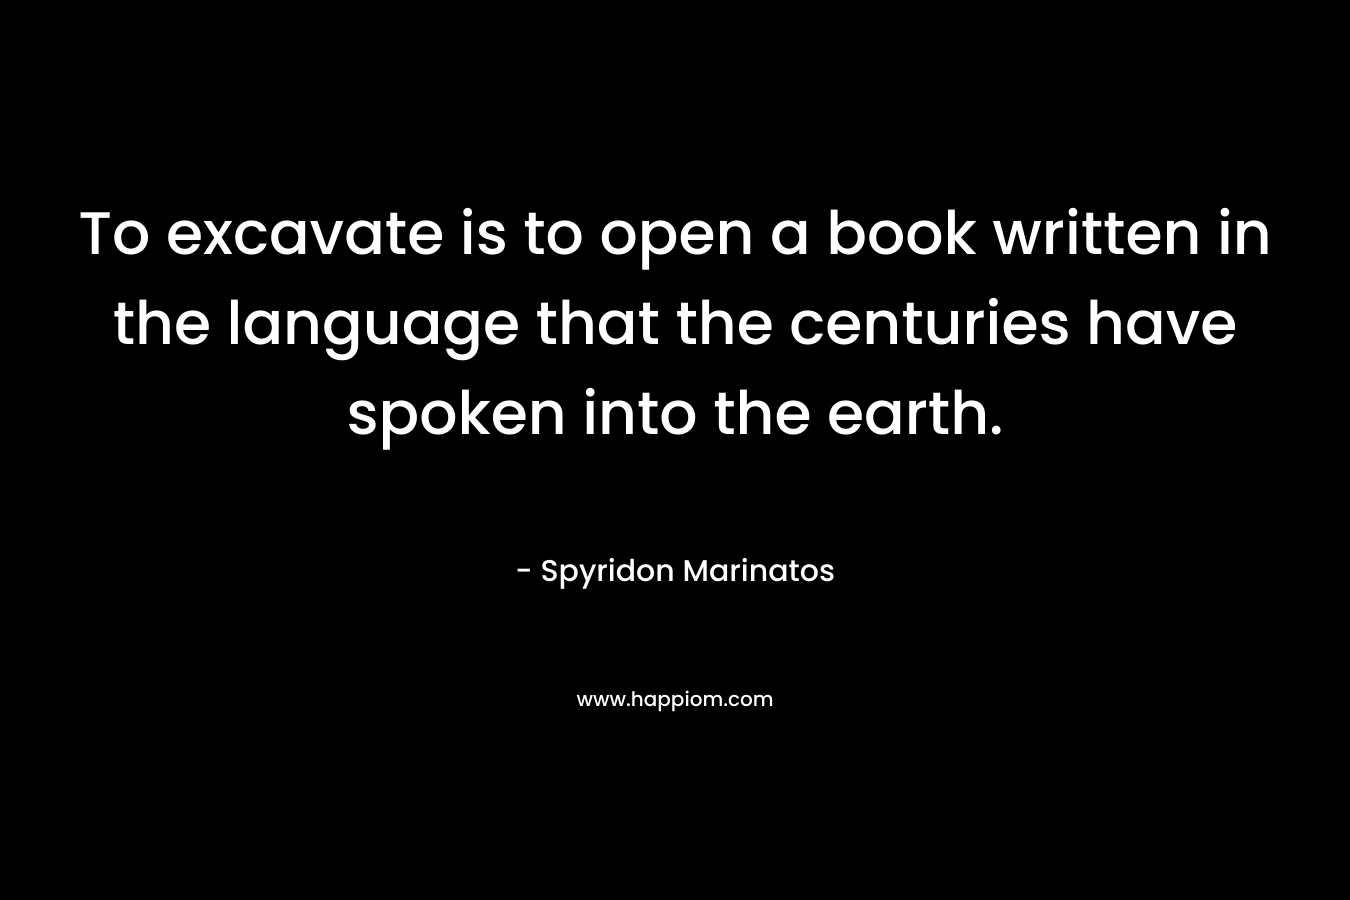 To excavate is to open a book written in the language that the centuries have spoken into the earth. – Spyridon Marinatos